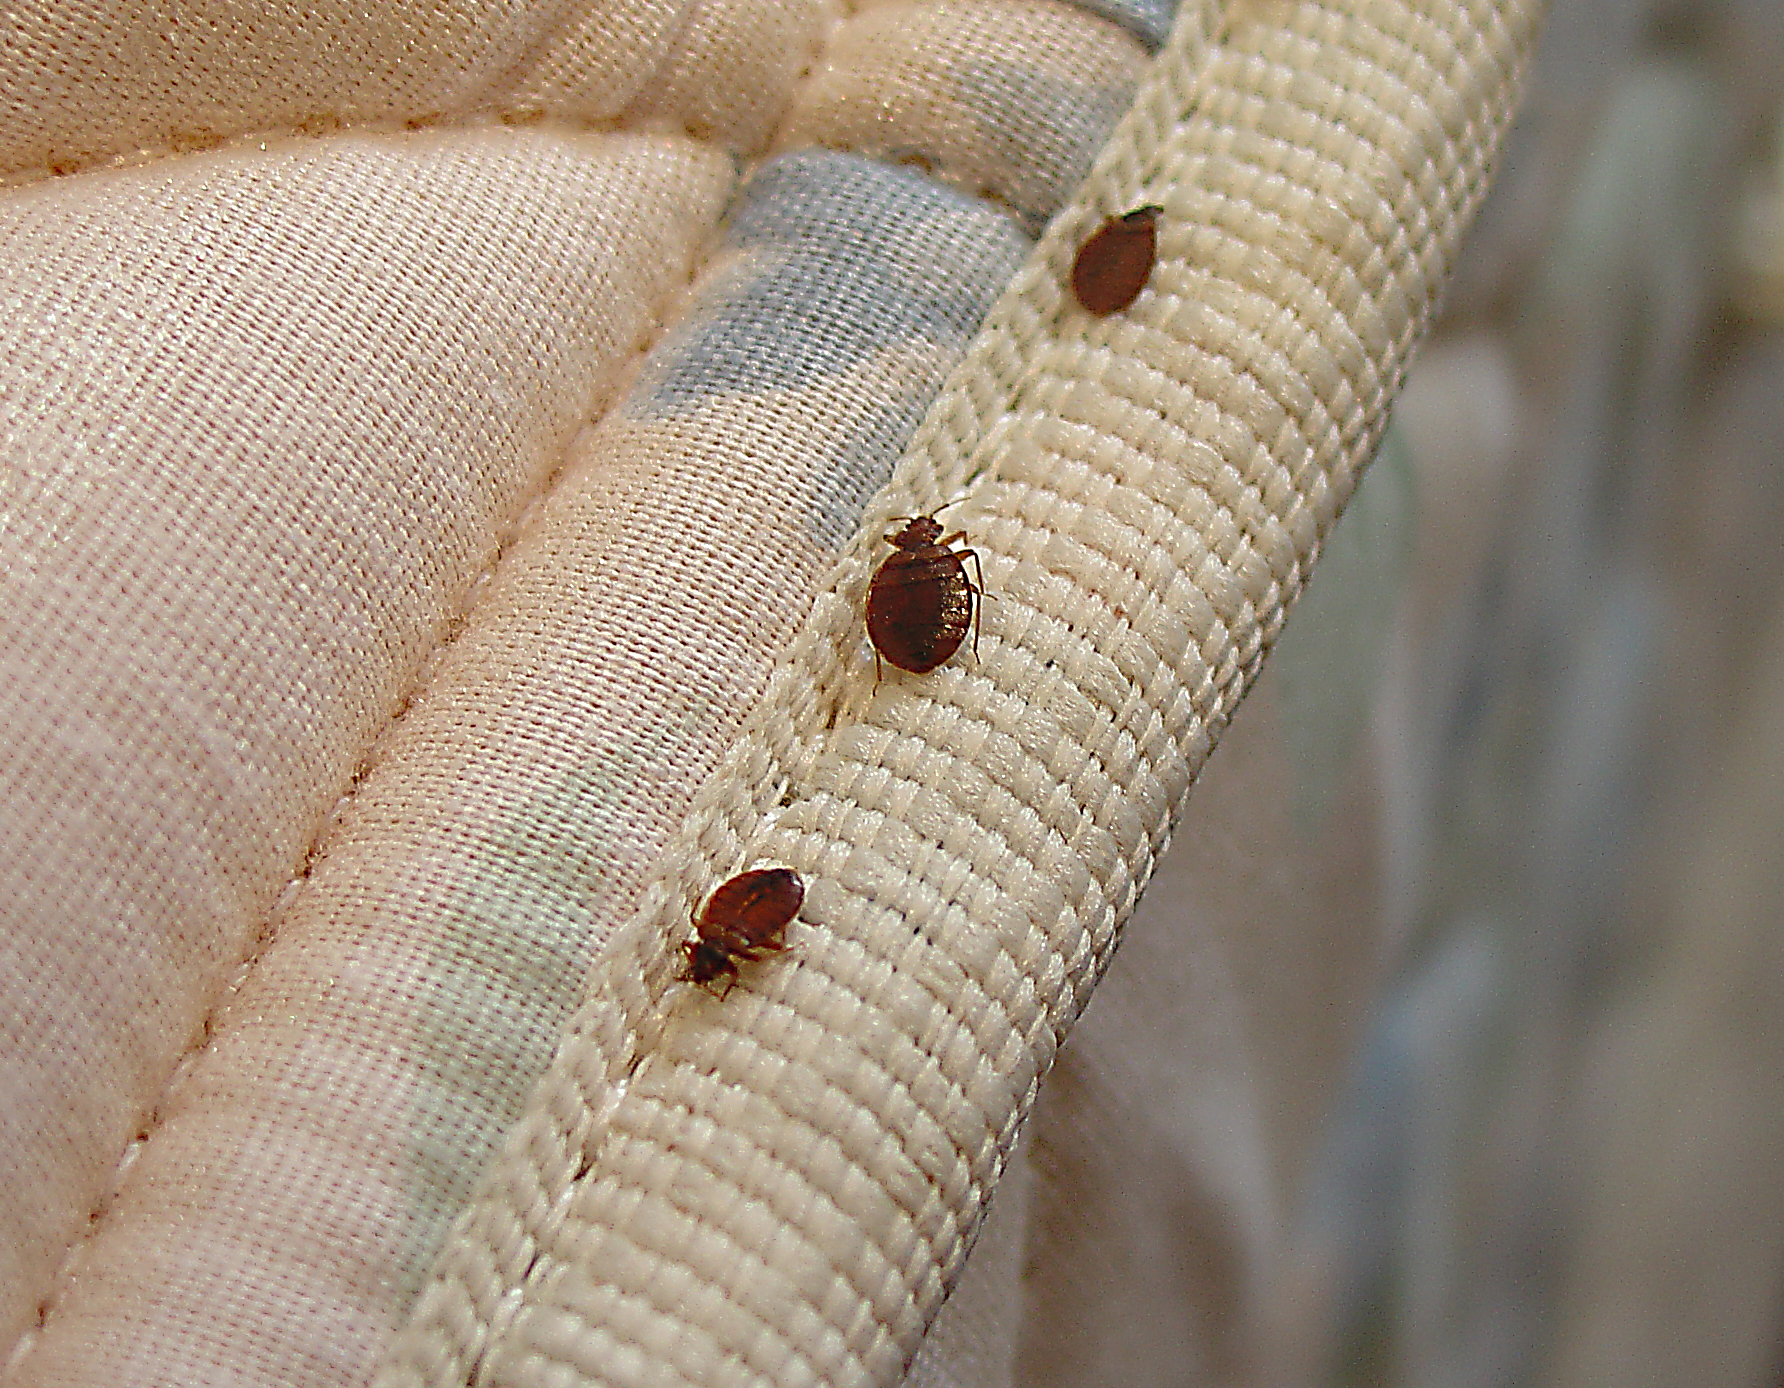 mattresses bed bugs color